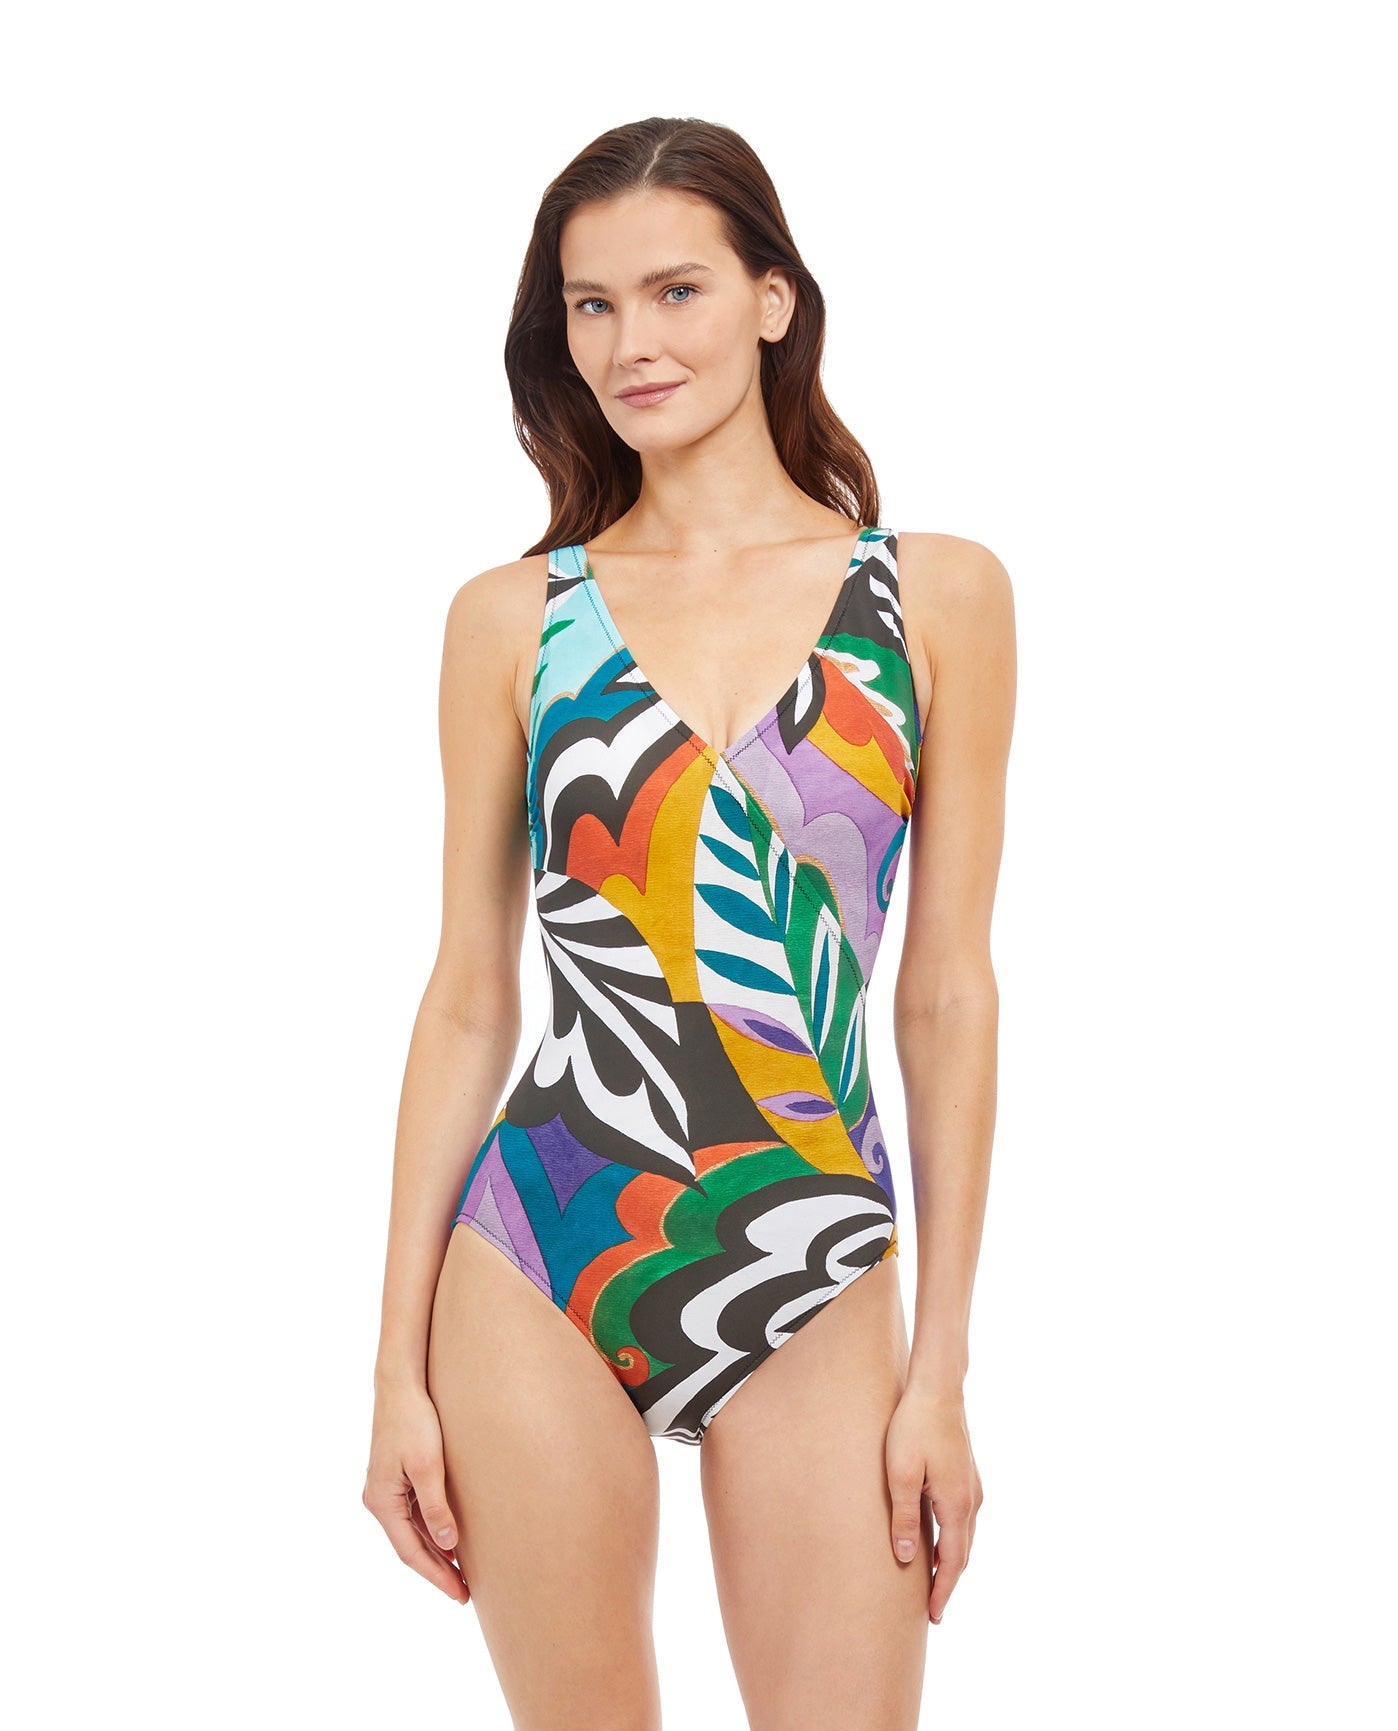 Front View Of Gottex Essentials Tribal Art Full Coverage V-Neck Surplice One Piece Swimsuit | Gottex Tribal Art